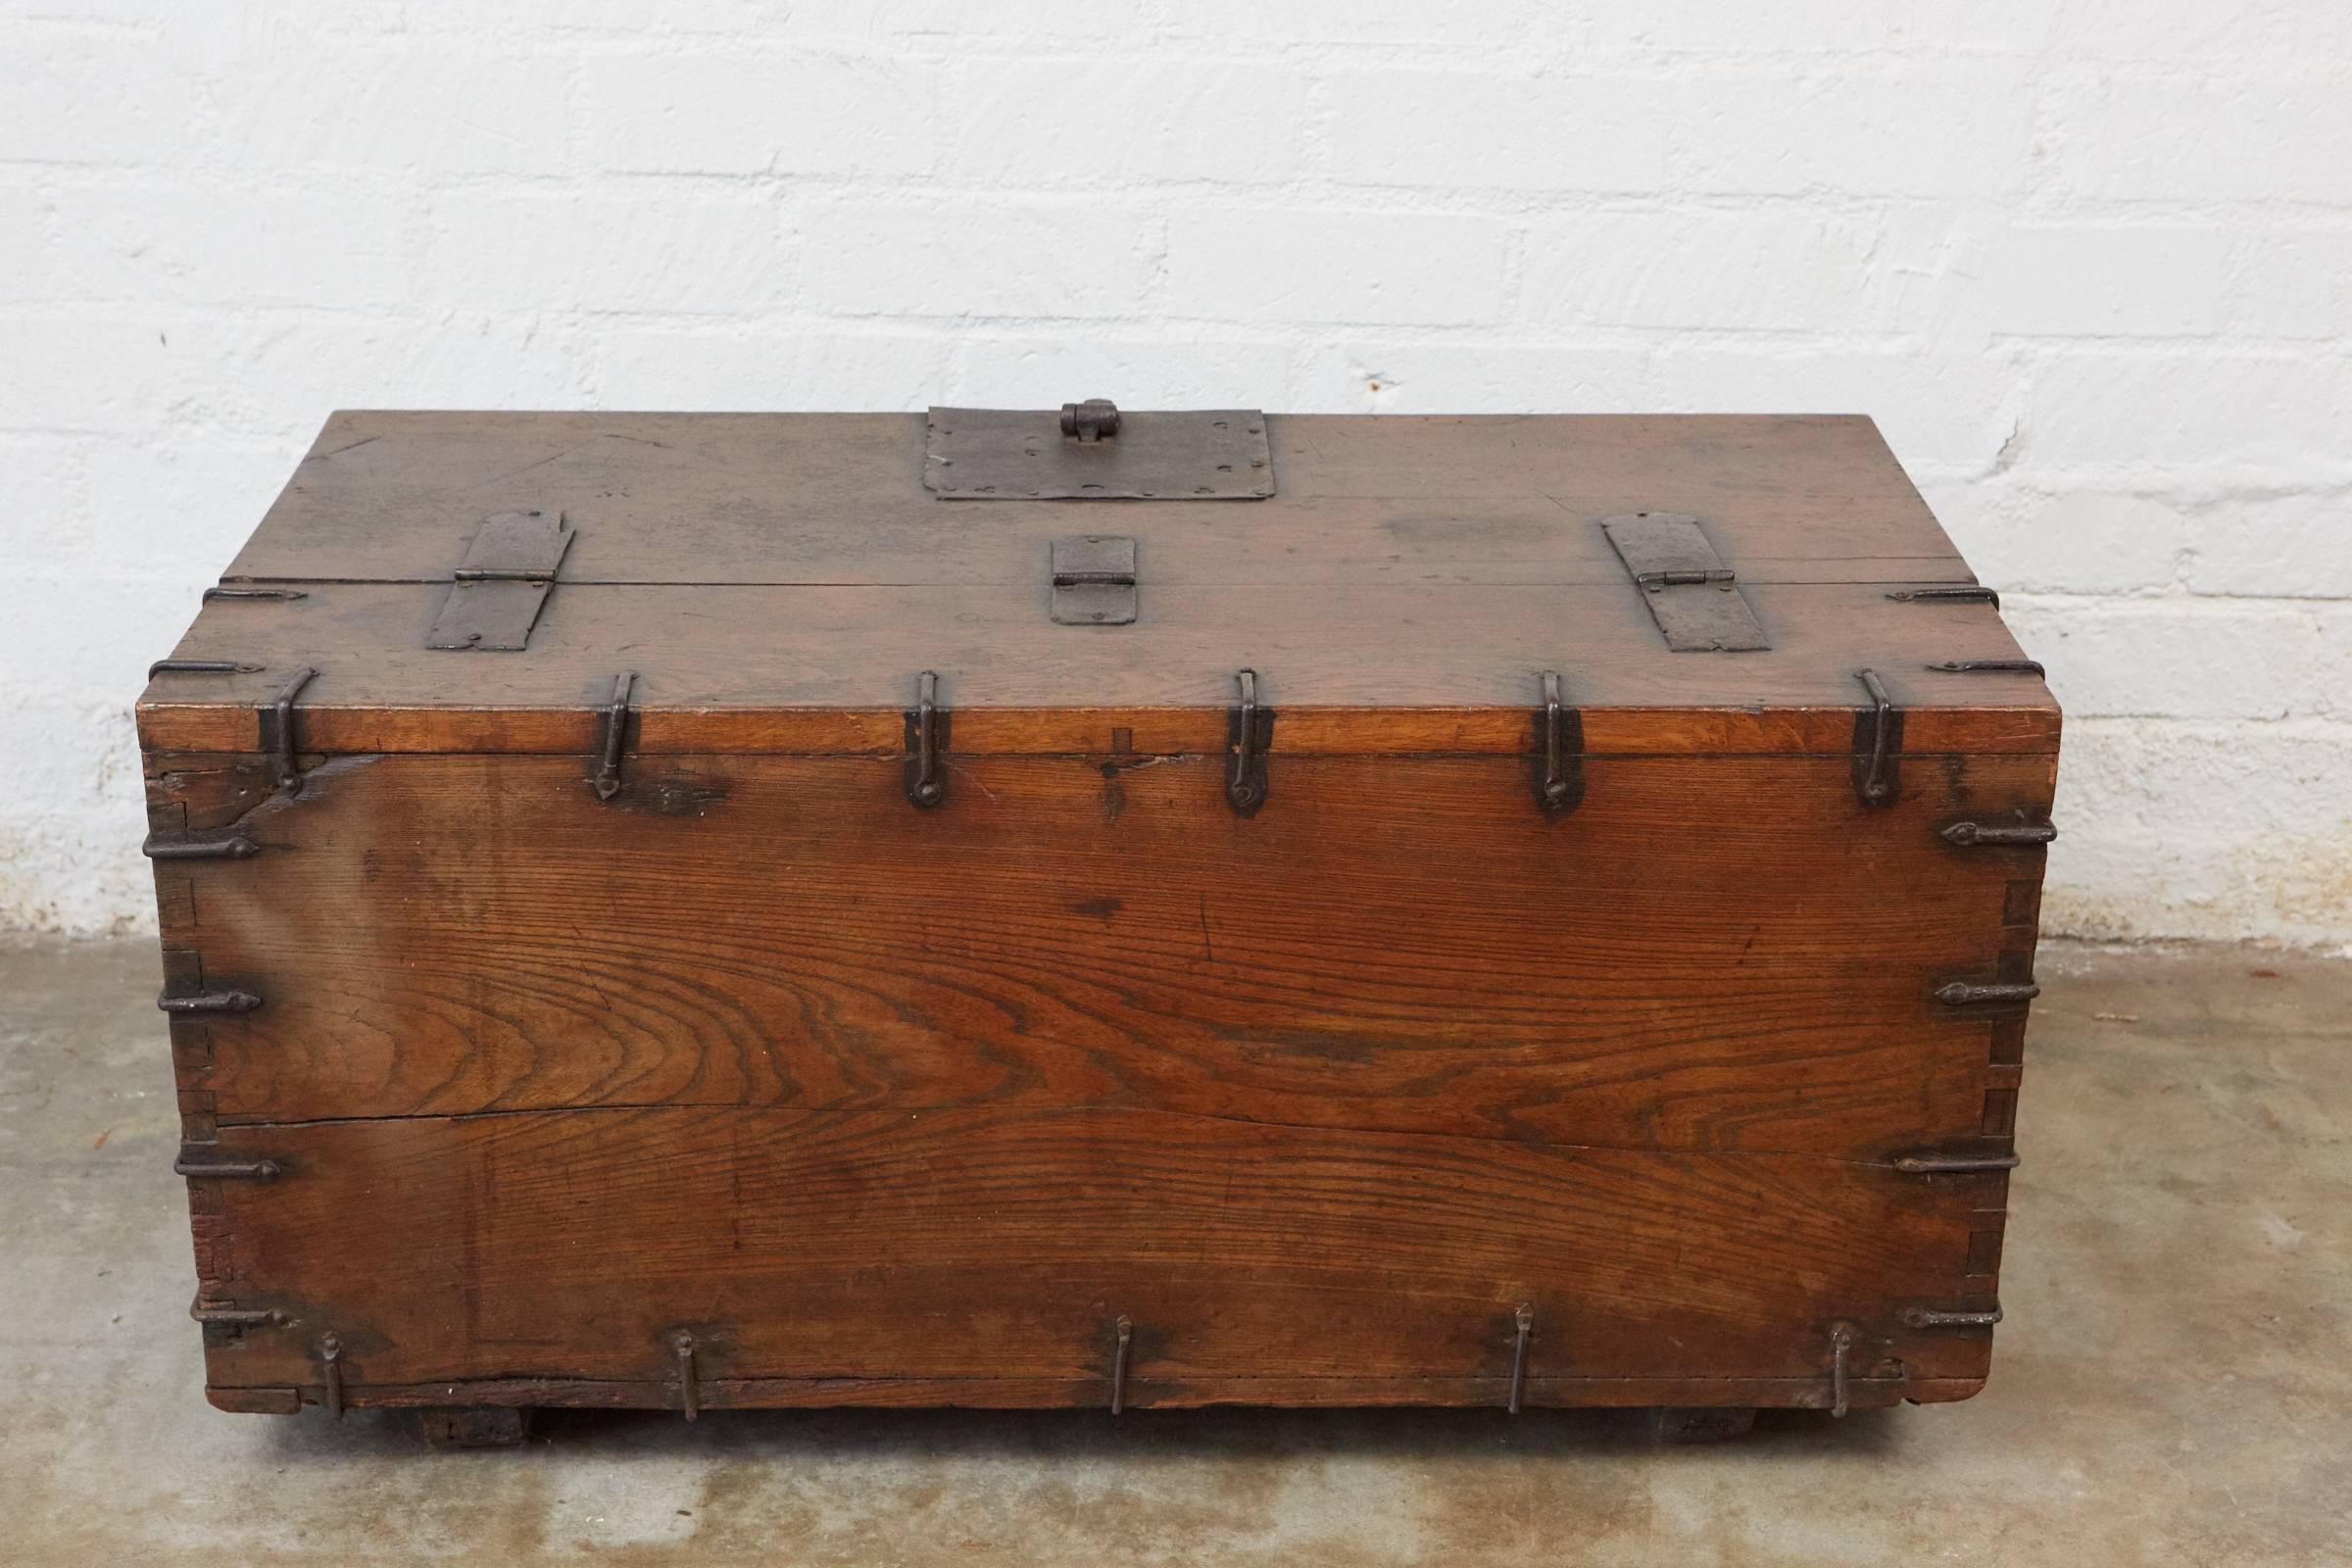 Forged 19th Century Japanese Trunk